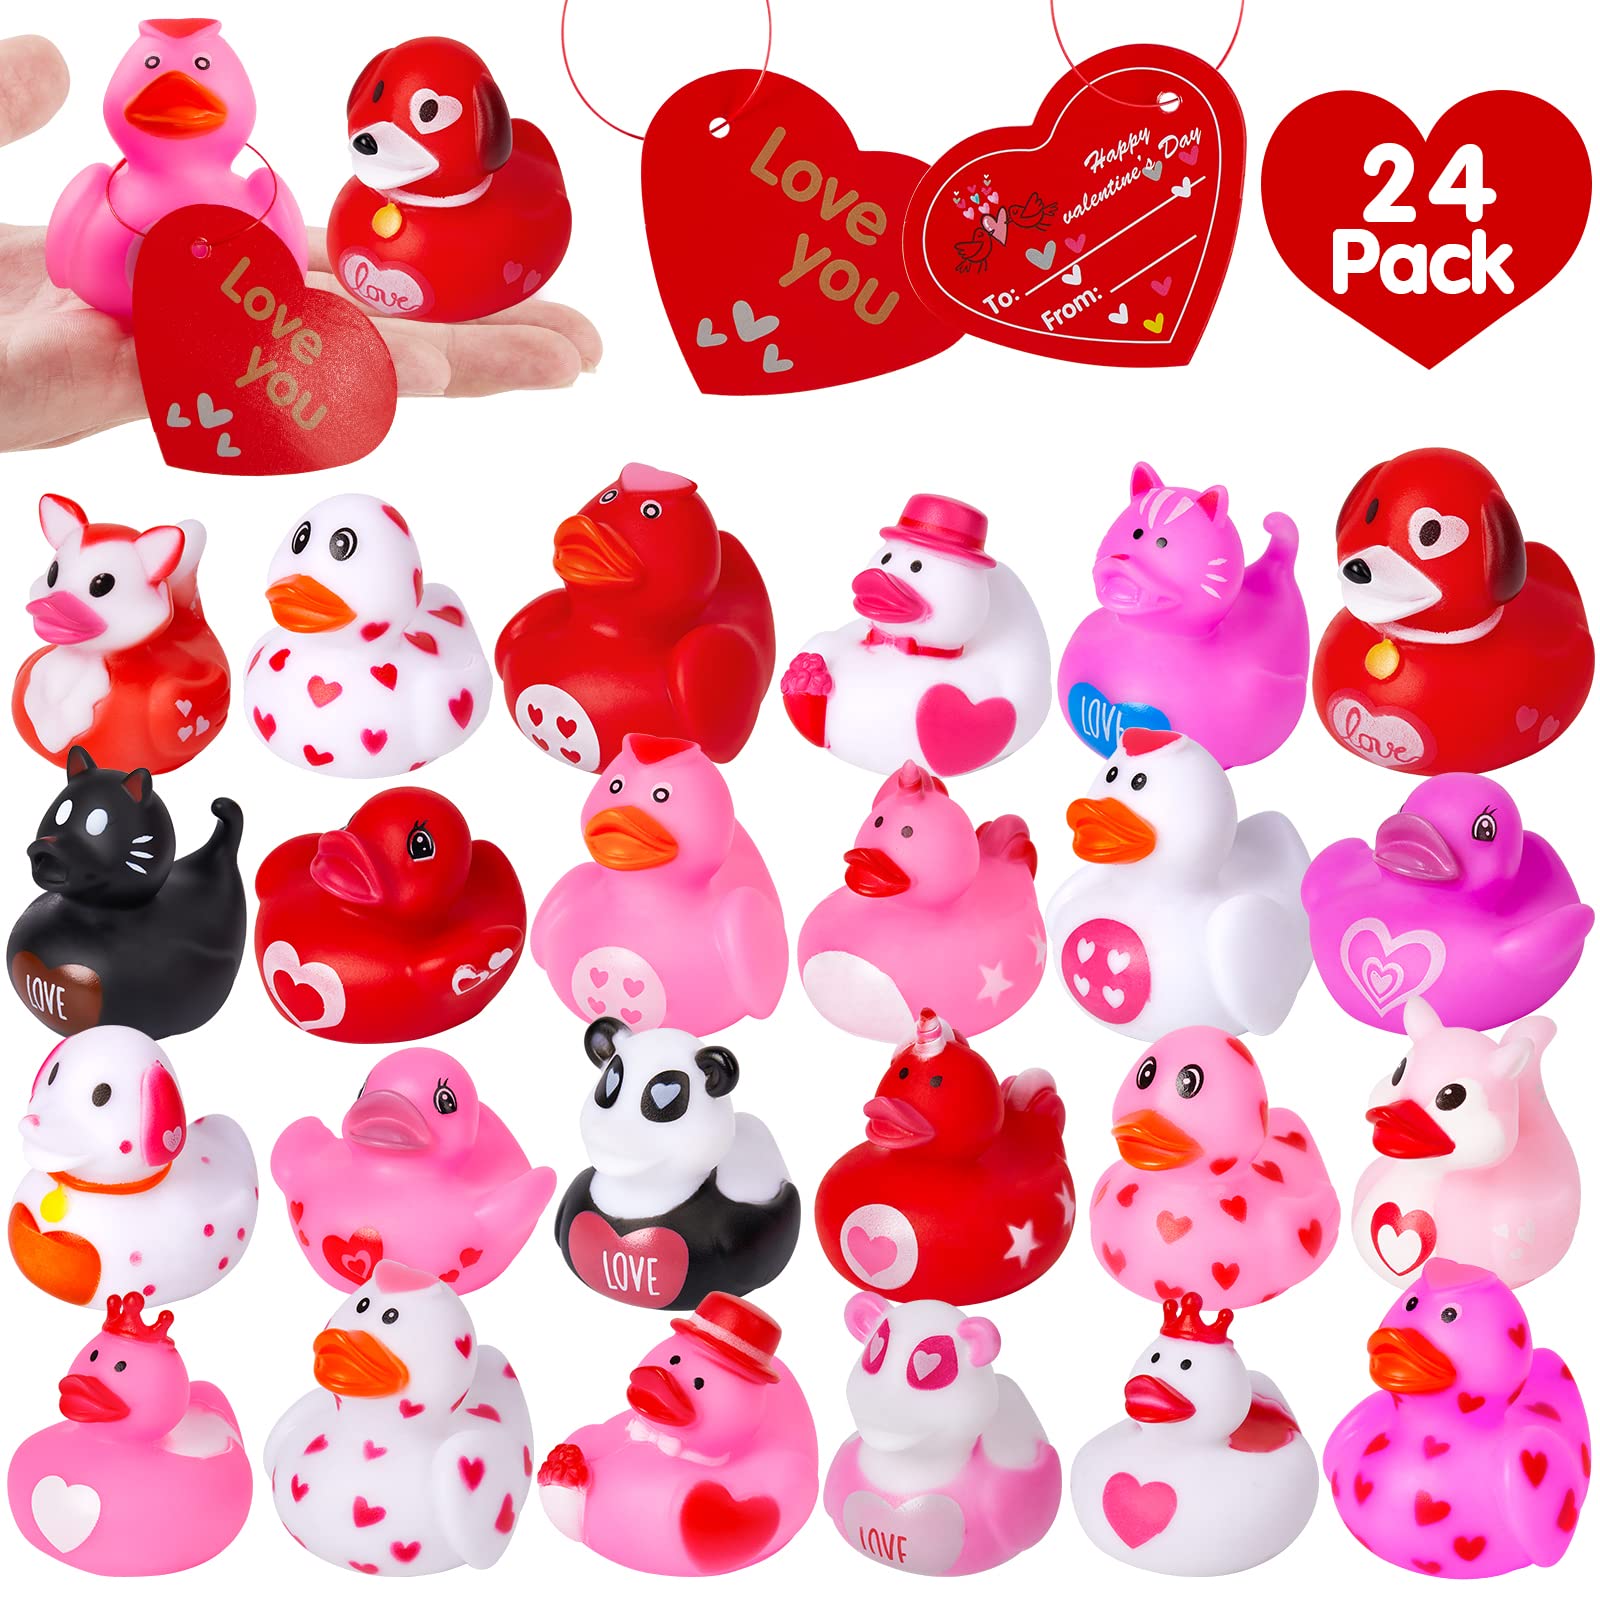 24 Pcs Valentines Gifts Rubber Ducks, Kids Valentine's Day Toys Gift Bulk Rubber Ducks, Party Favors Rubber Duck Jeep Gift Bath Toys Goodie Bags Stuffers, Classroom Exchange Game Prizes School Rewards